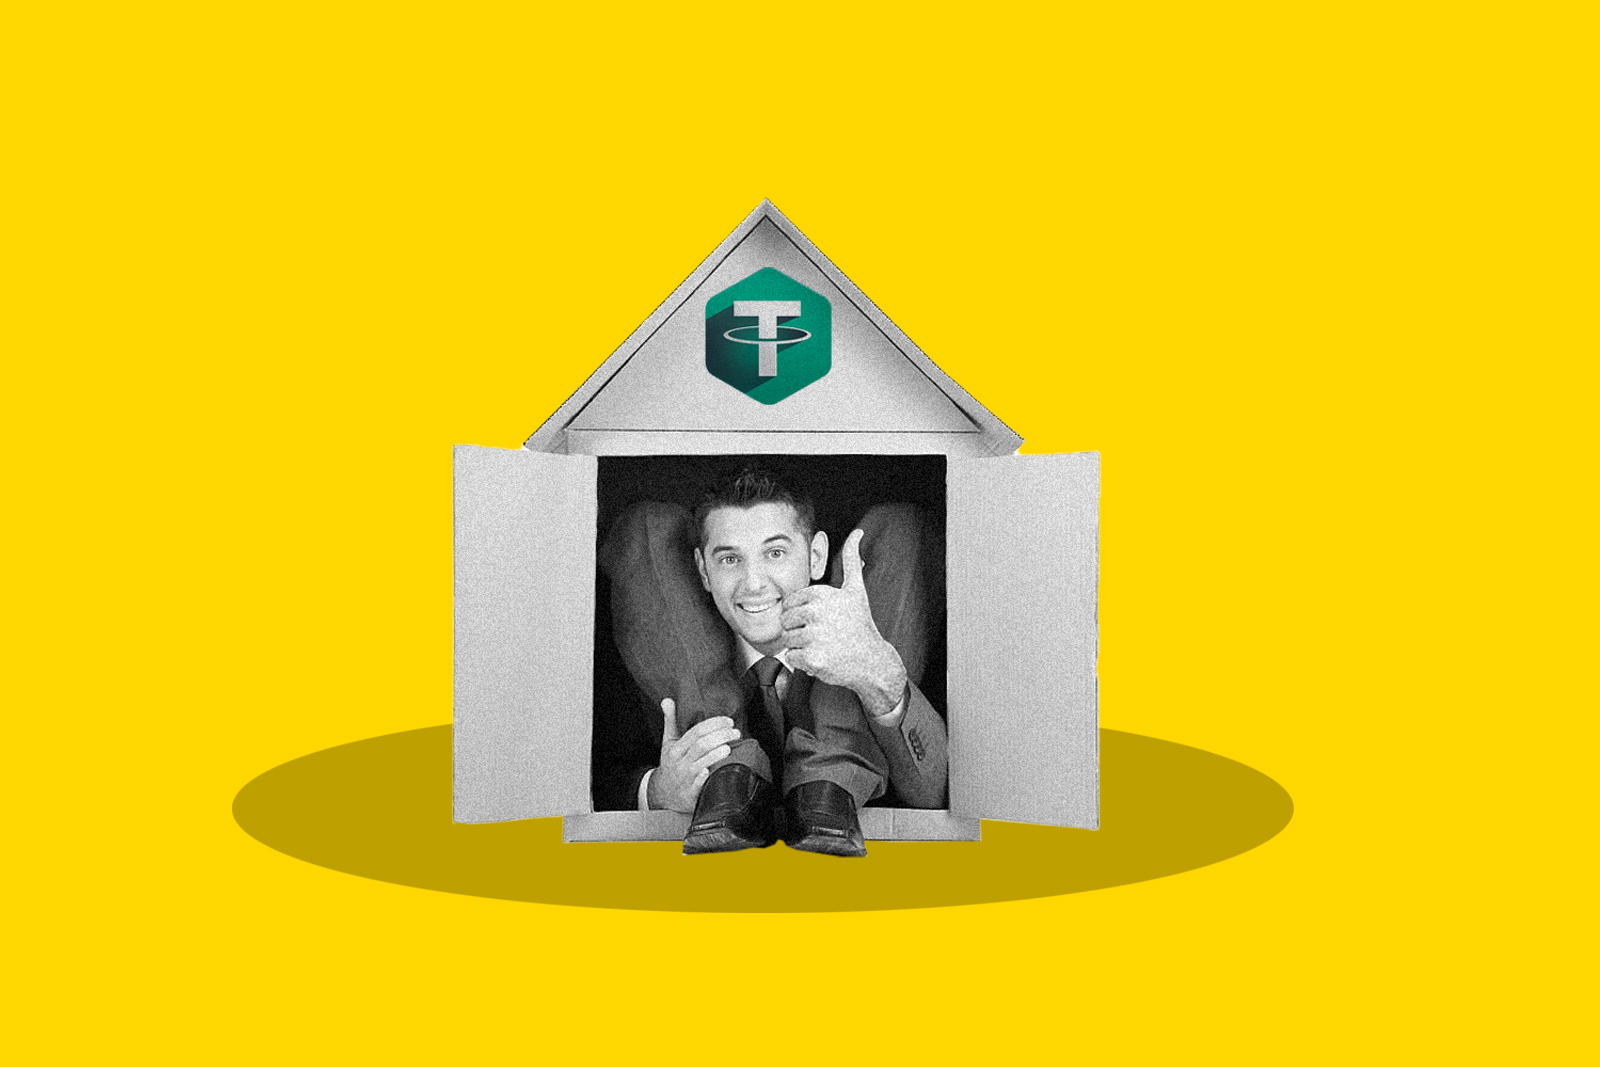 Tether closed in a box happy dog house faking